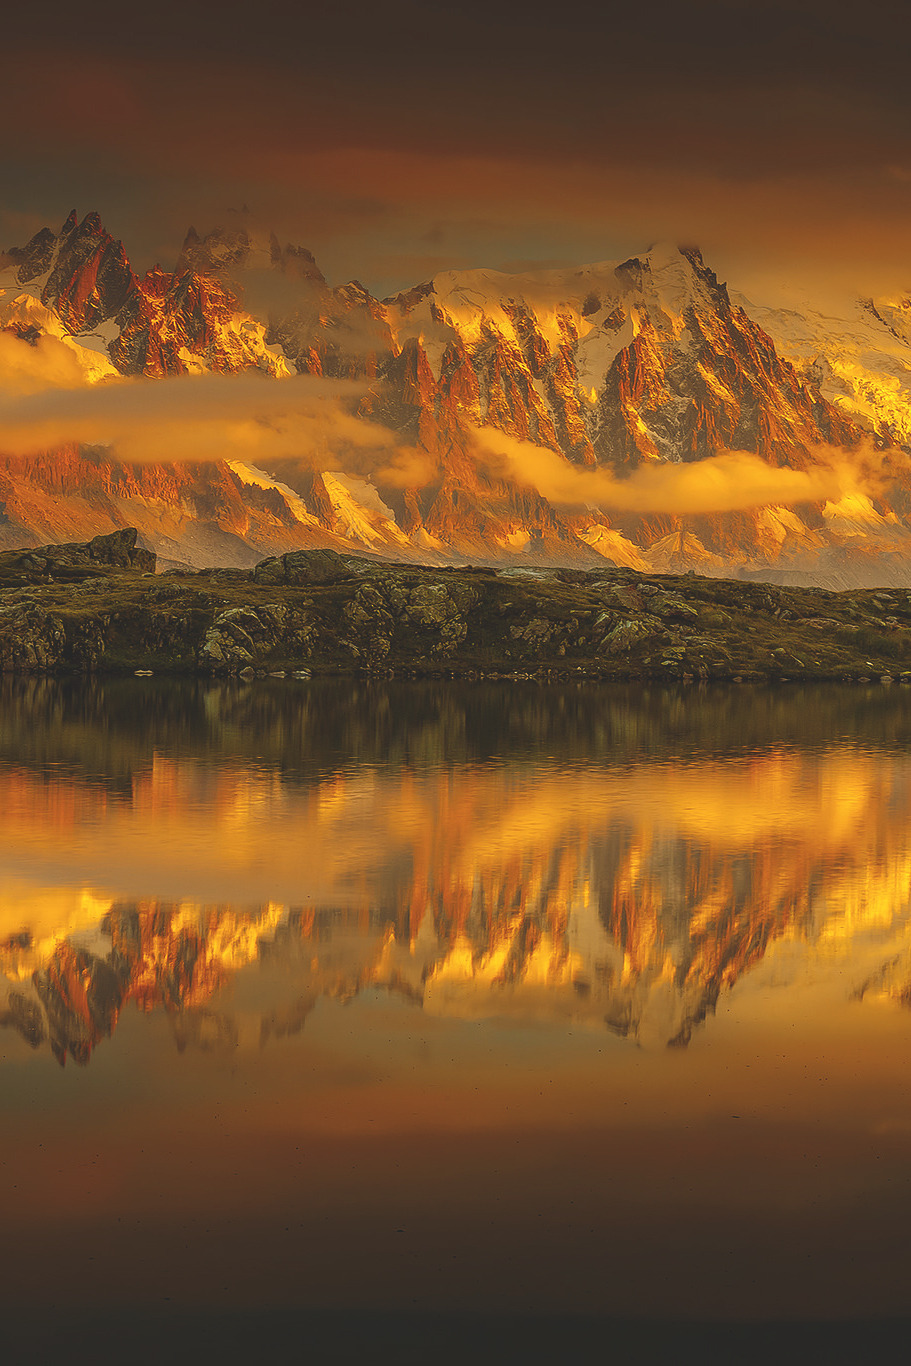 lsleofskye:  Sunset over the Chamonix Aiguilles from Lac des Cheserys